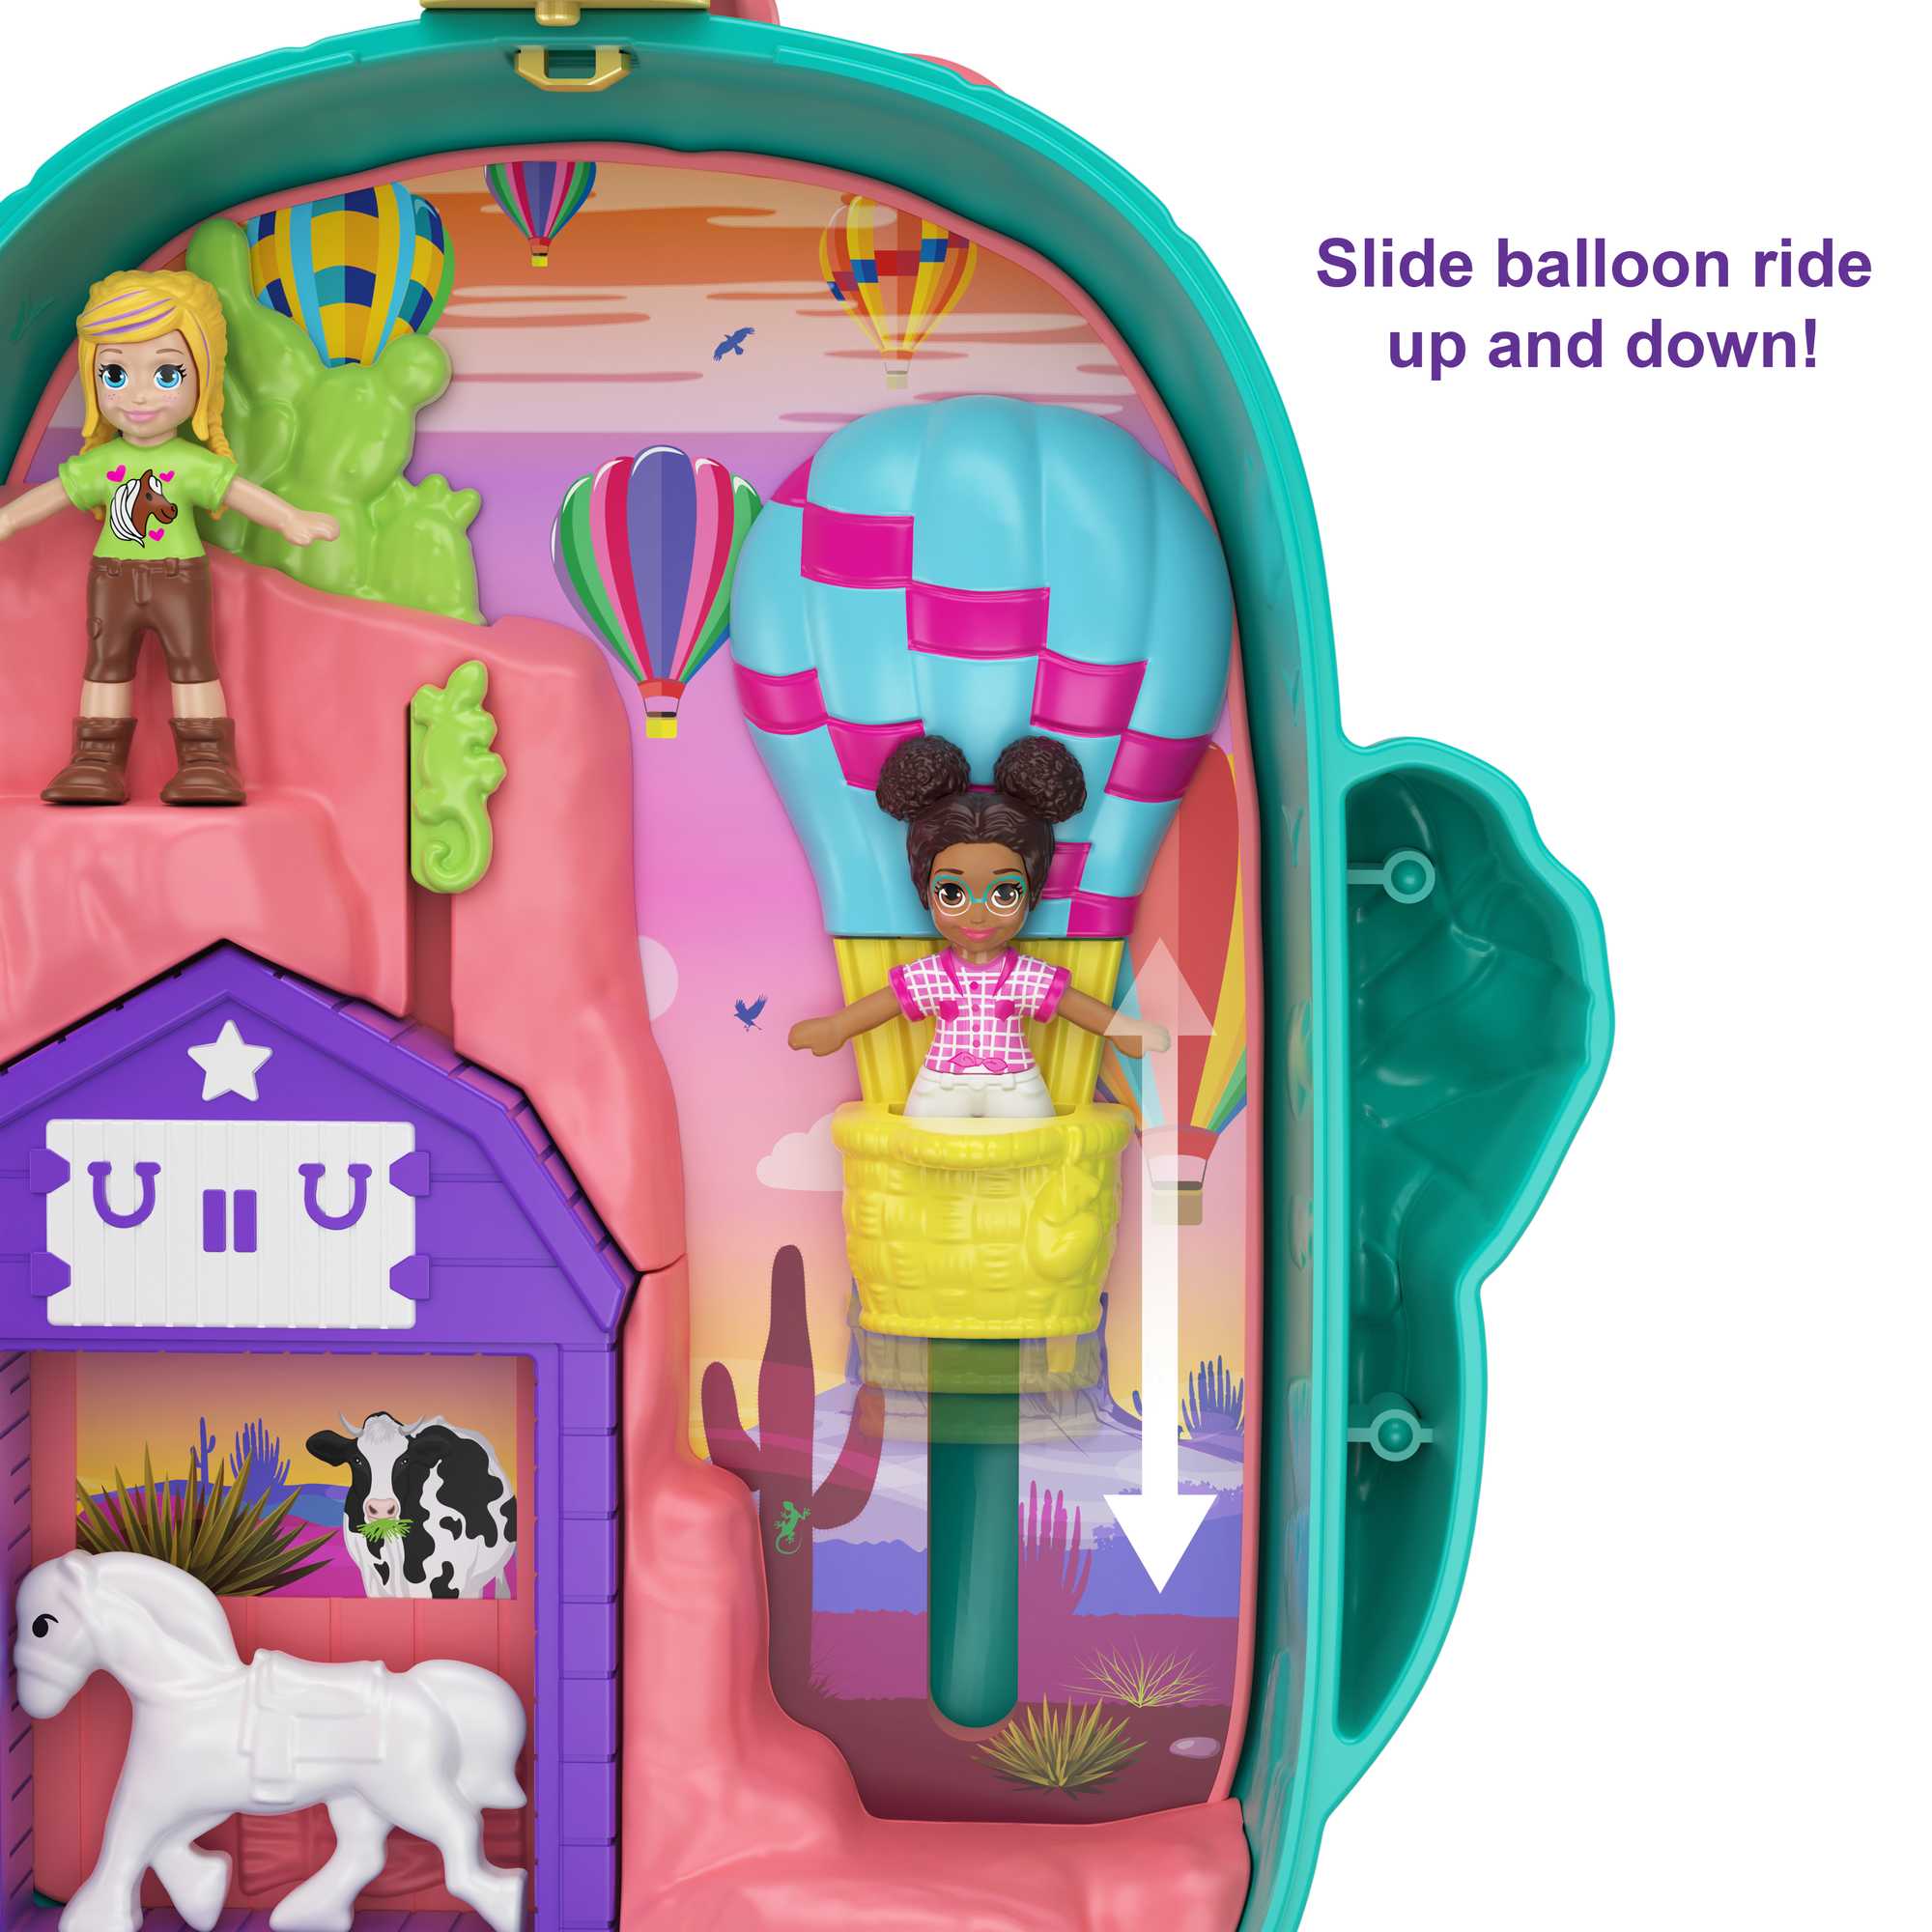 Polly Pocket Otter Aquarium Compact Playset with 2 Micro Dolls